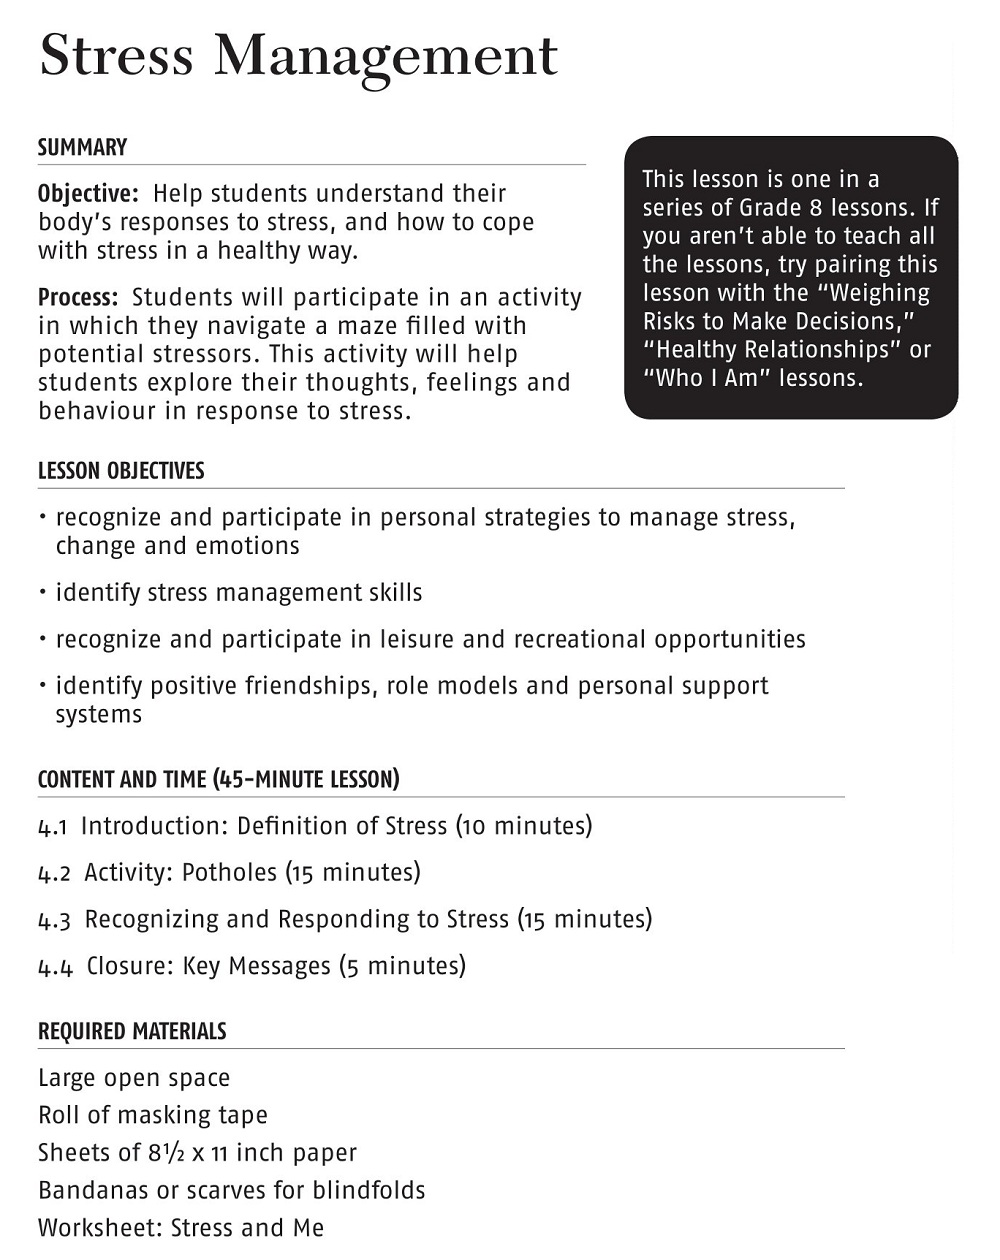 Stress Management Workbook for Students